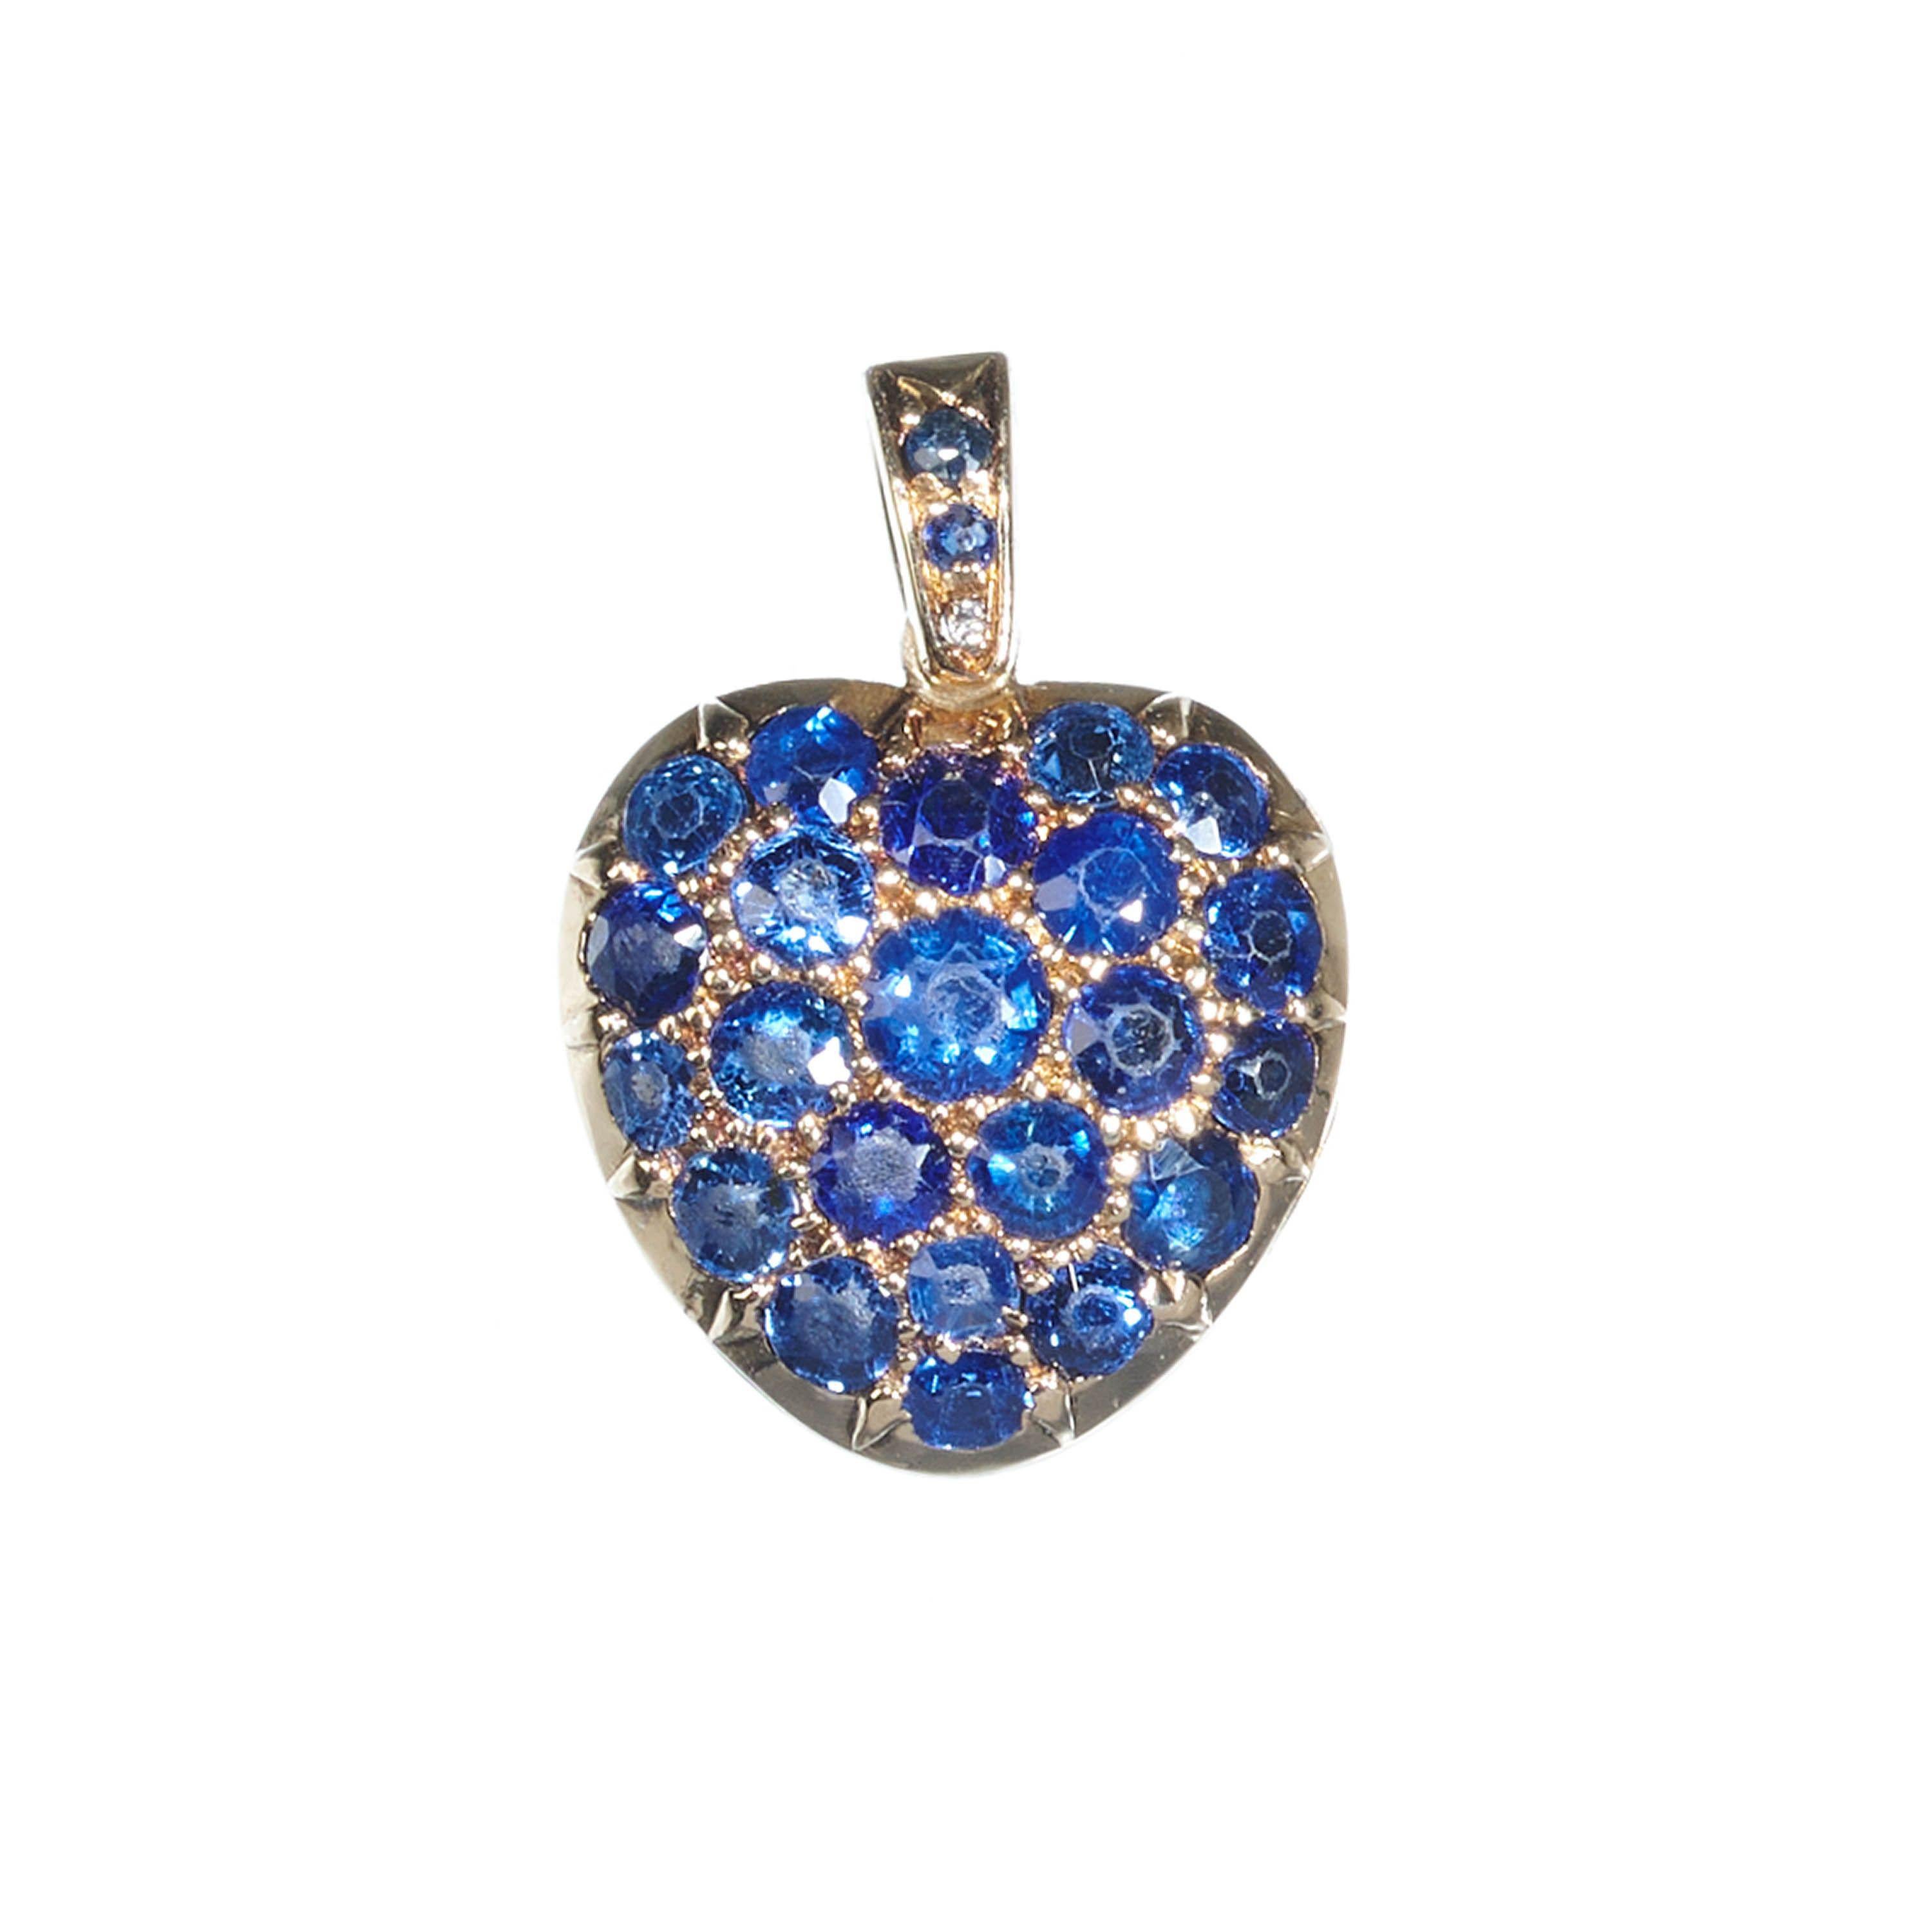 An antique sapphire and diamond double sided locket, one side is pavé set with sapphires and sapphires set in the bail, in gold settings, the other side is pavé set with old-cut diamonds, with an Edwardian-cut diamond in the centre and diamonds in